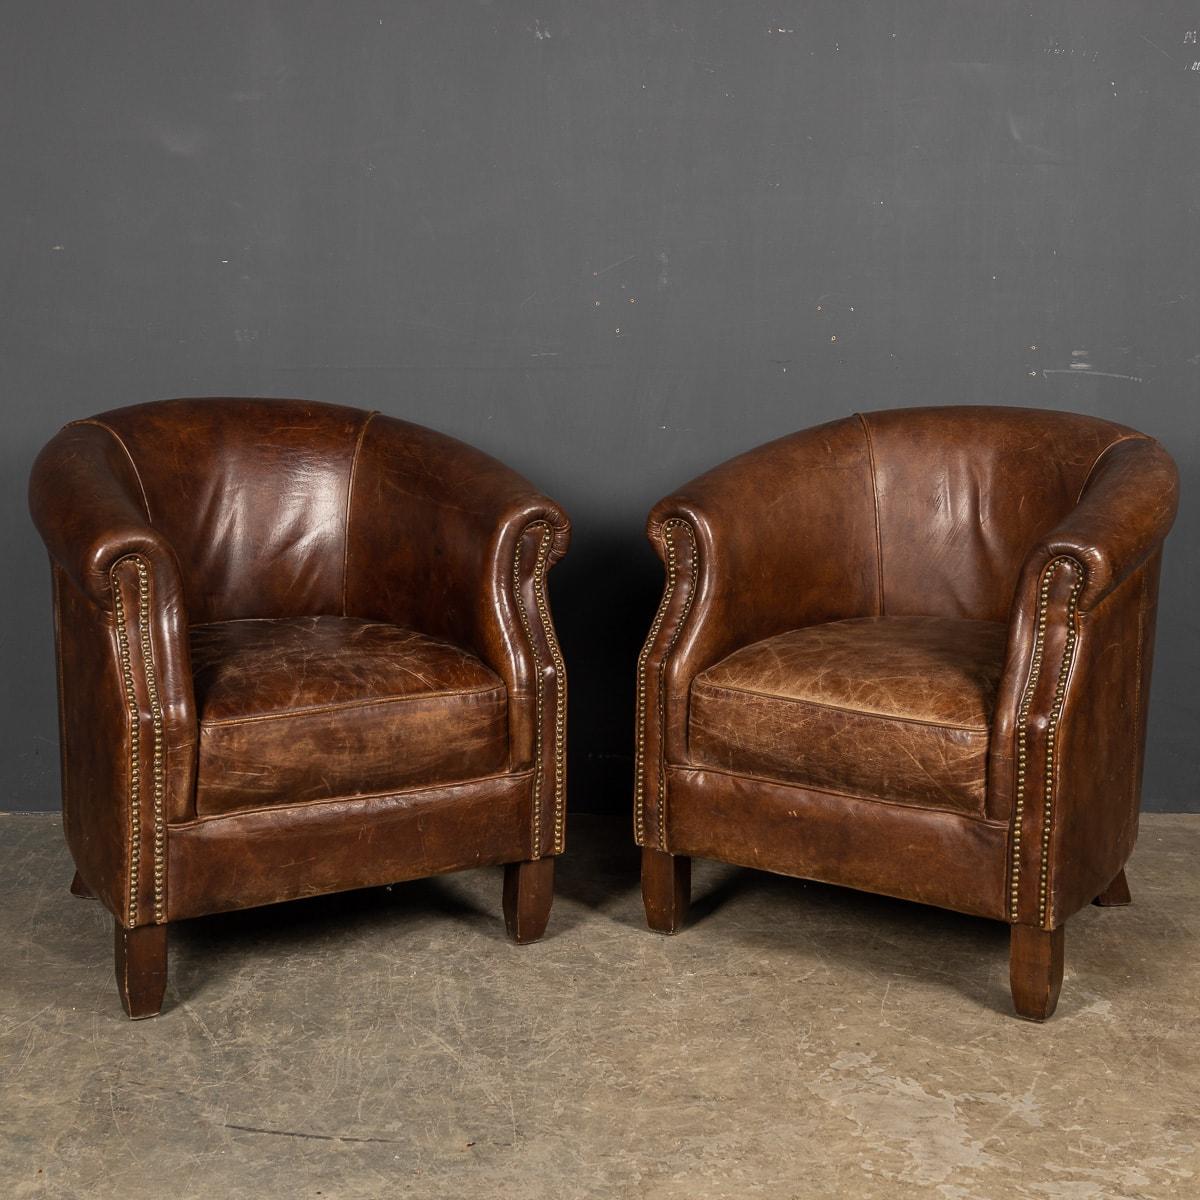 Showing superb patina and colour, this wonderful pair of tub chairs were hand upholstered leather with brass stud detail in Holland by the finest craftsmen in the latter part of the 20th century. 

CONDITION
In Good Condition - Some wear consistent